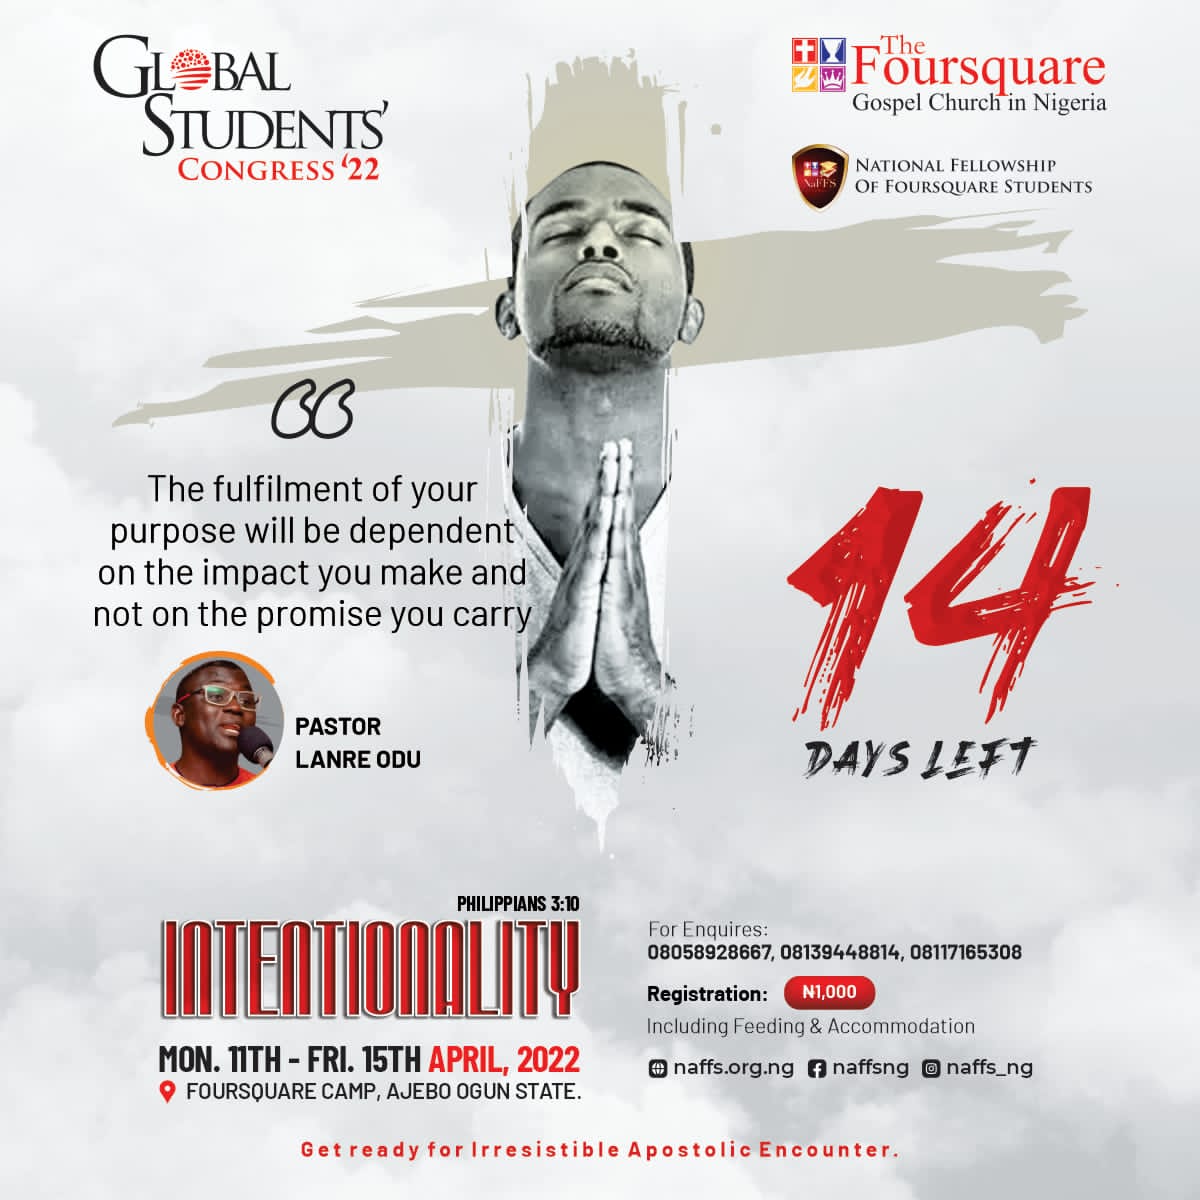 It is 14 days to GSC '22! 🔥 Join us from Monday, 11th - Friday, 15th April, 2022 at Foursquare Camp, Ajebo as we stay! Registration covers feeding and accommodation. Register via naffs.org.ng Come, let's journey into intentional impact! #GSC2022 #Intentionality